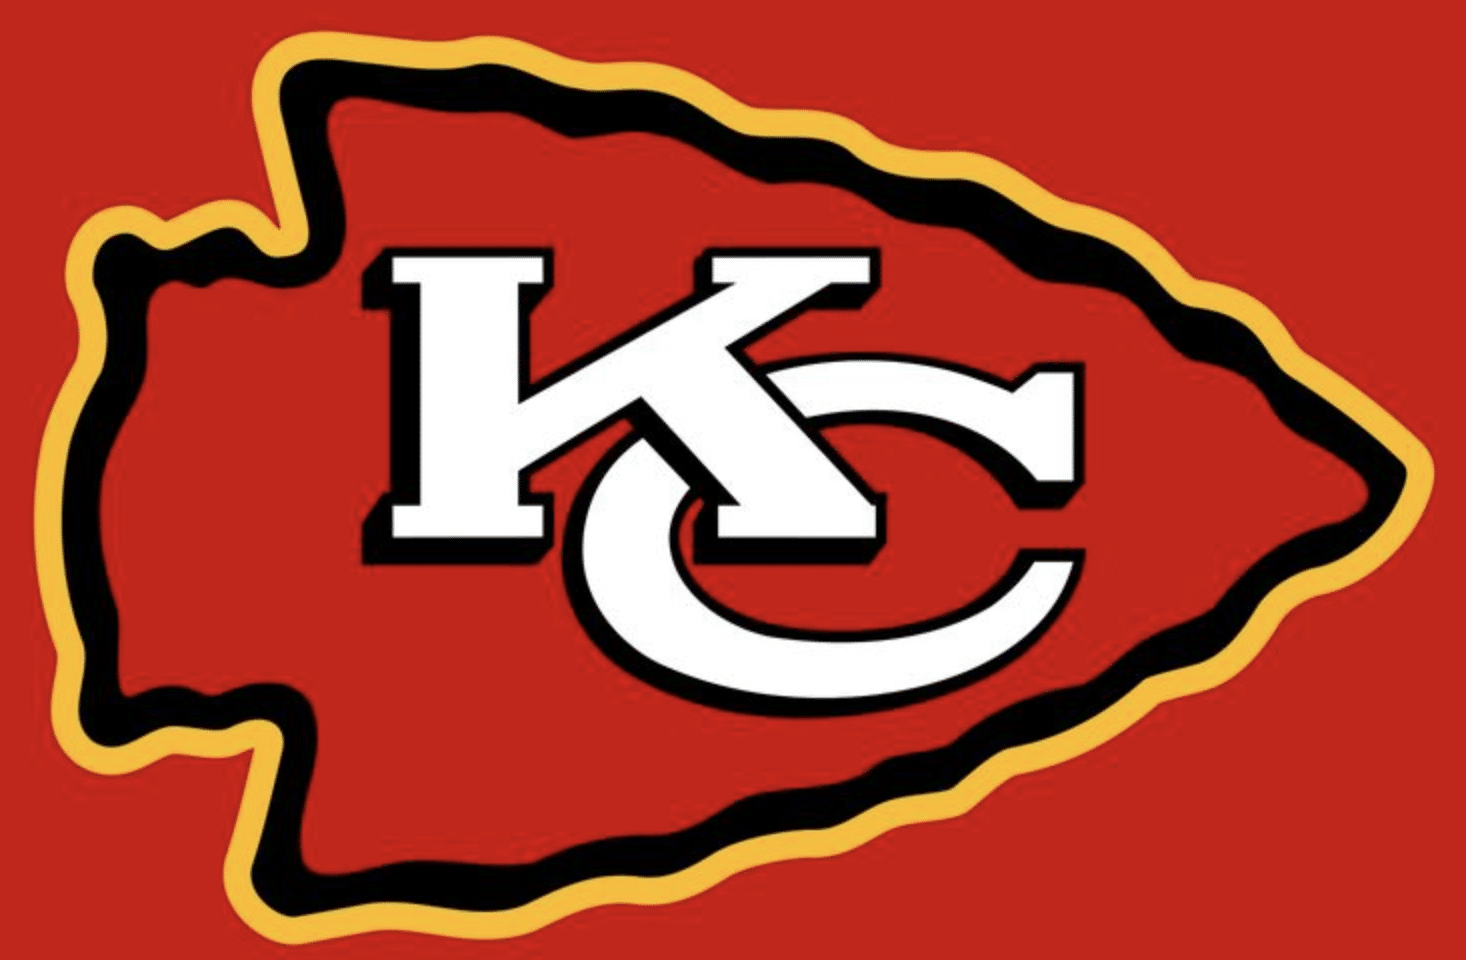 Kansas City Chiefs Injury Travis Kelce Ruled Out Kansas City Chiefs were tipping plays Patrick Mahomes Sr. Arrested